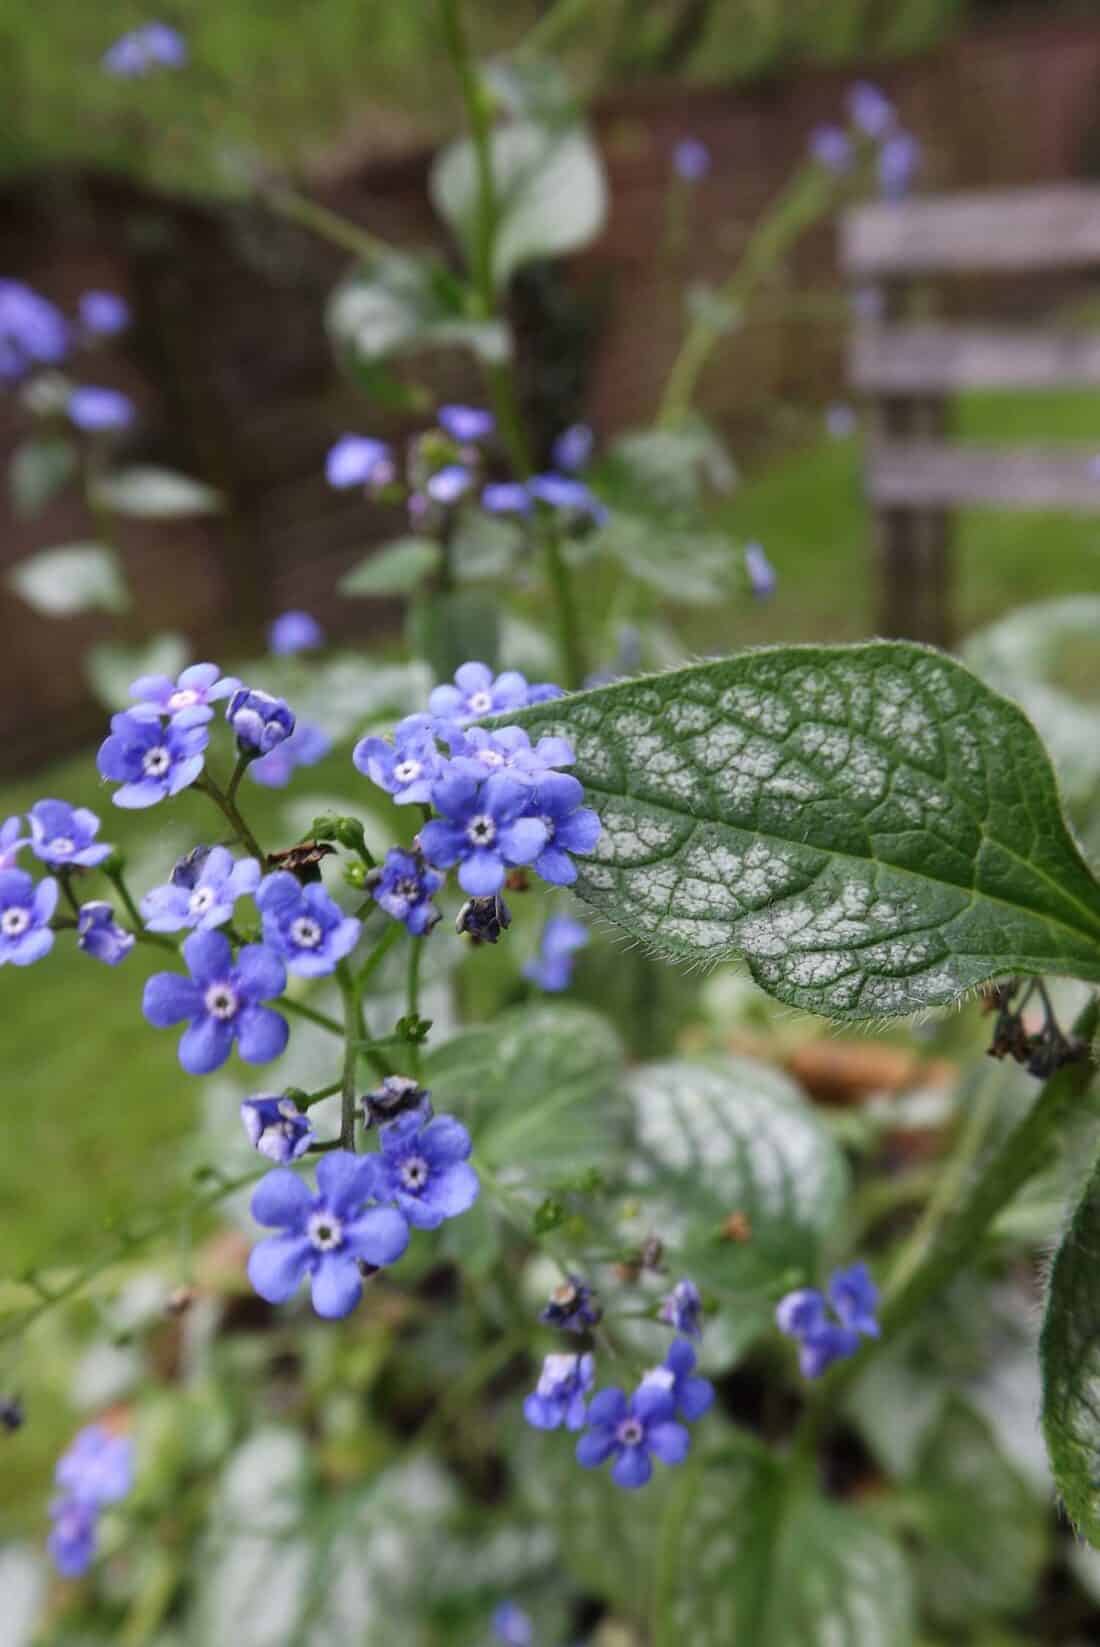 brunnera maculata - ground cover plant for shade
